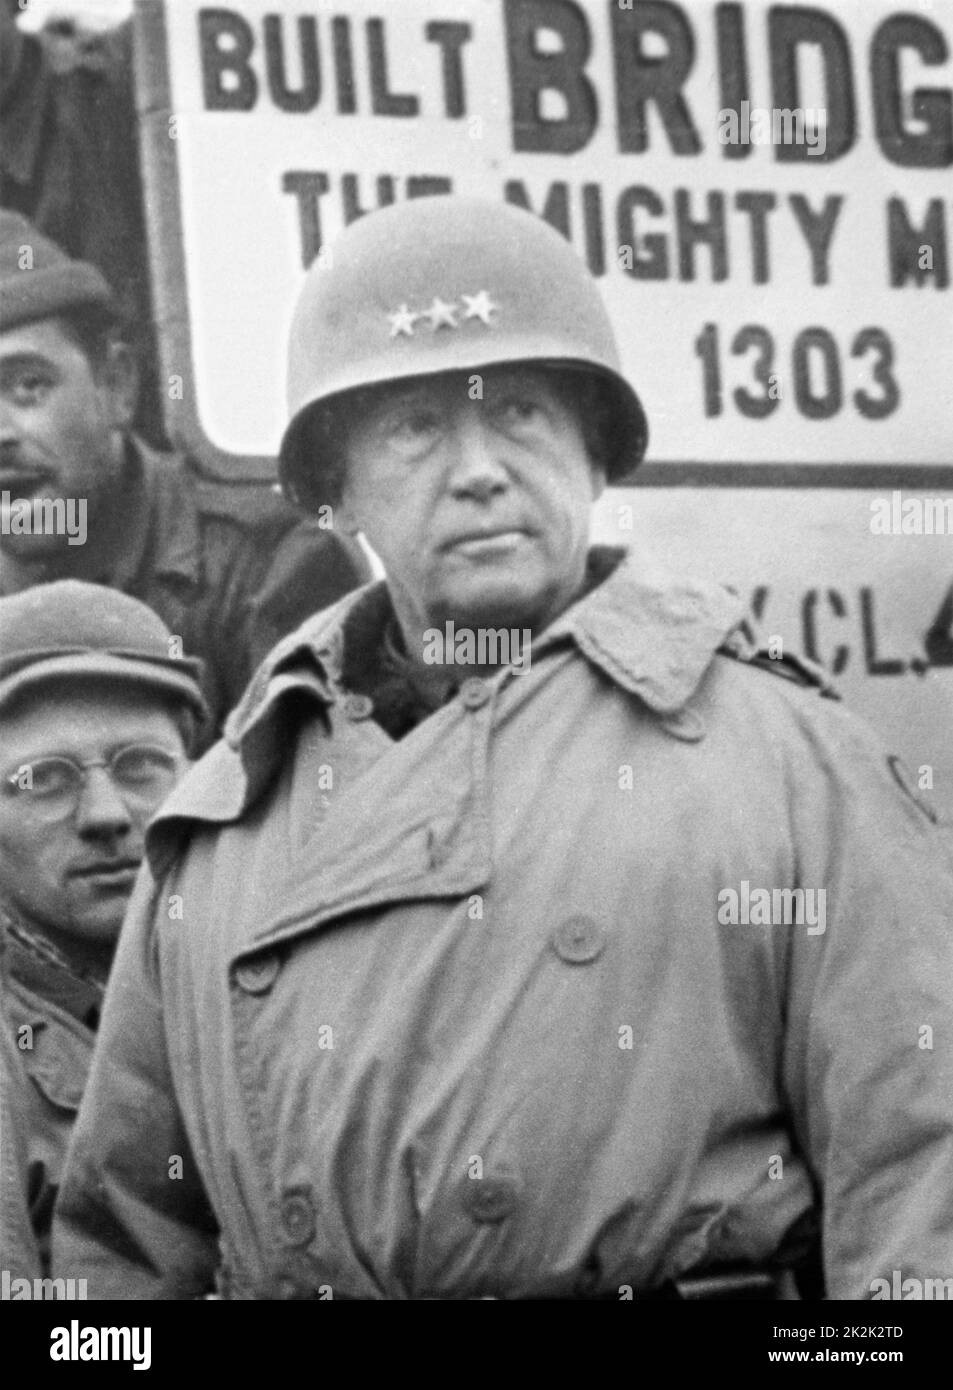 General George Patton visits the soldiers of the 1303rd Engineer Regiment, who have just completed the construction of a bridge over the Sauer River, linking Luxembourg to Germany. 20 February 1945 Stock Photo